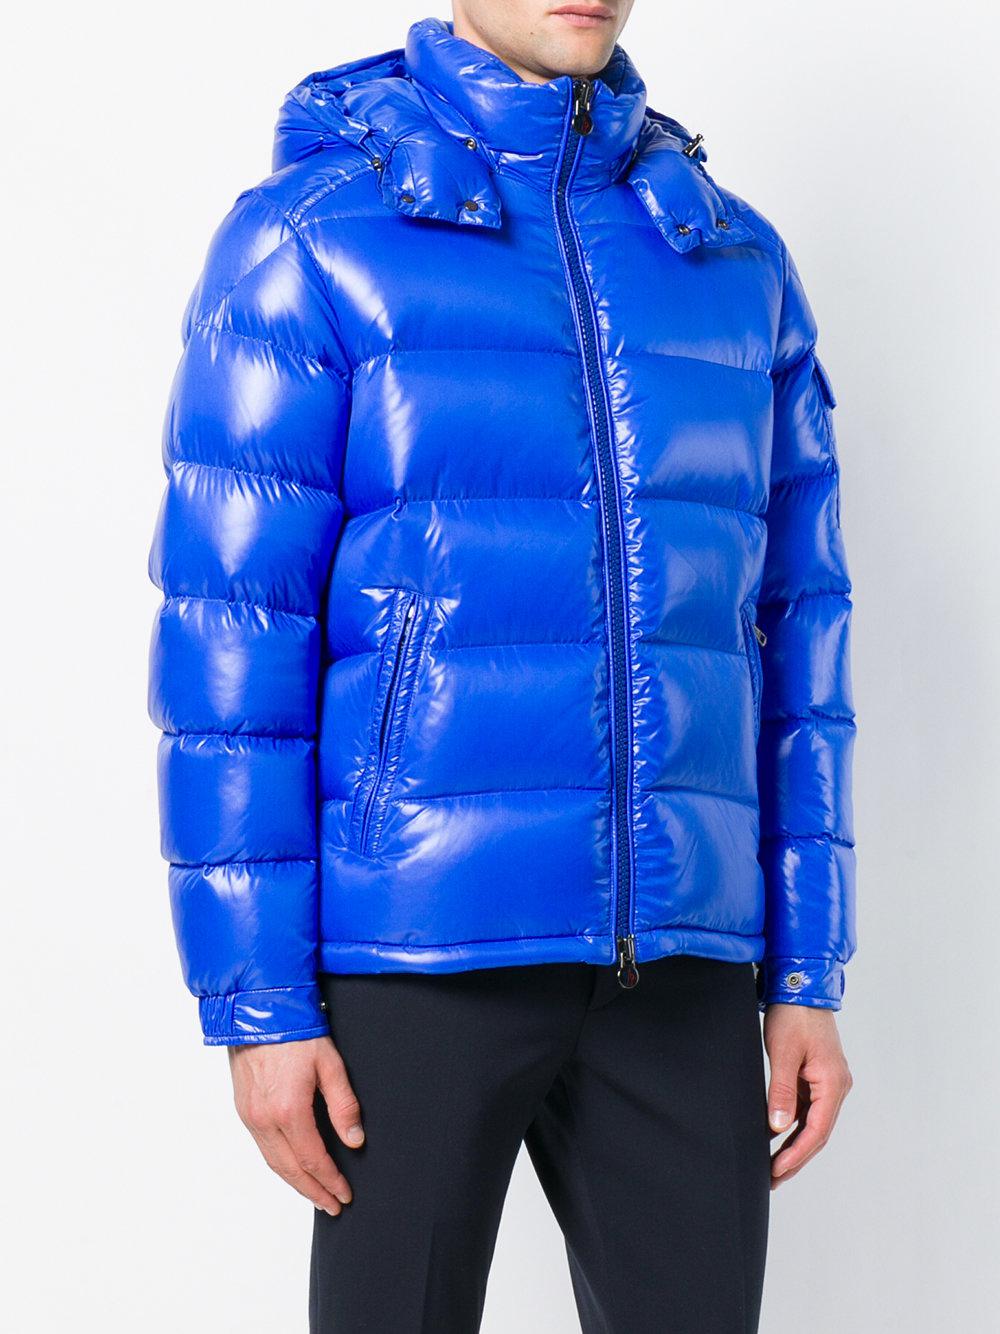 Moncler Blue Jacket Clearance, 58% OFF | www.chine-magazine.com